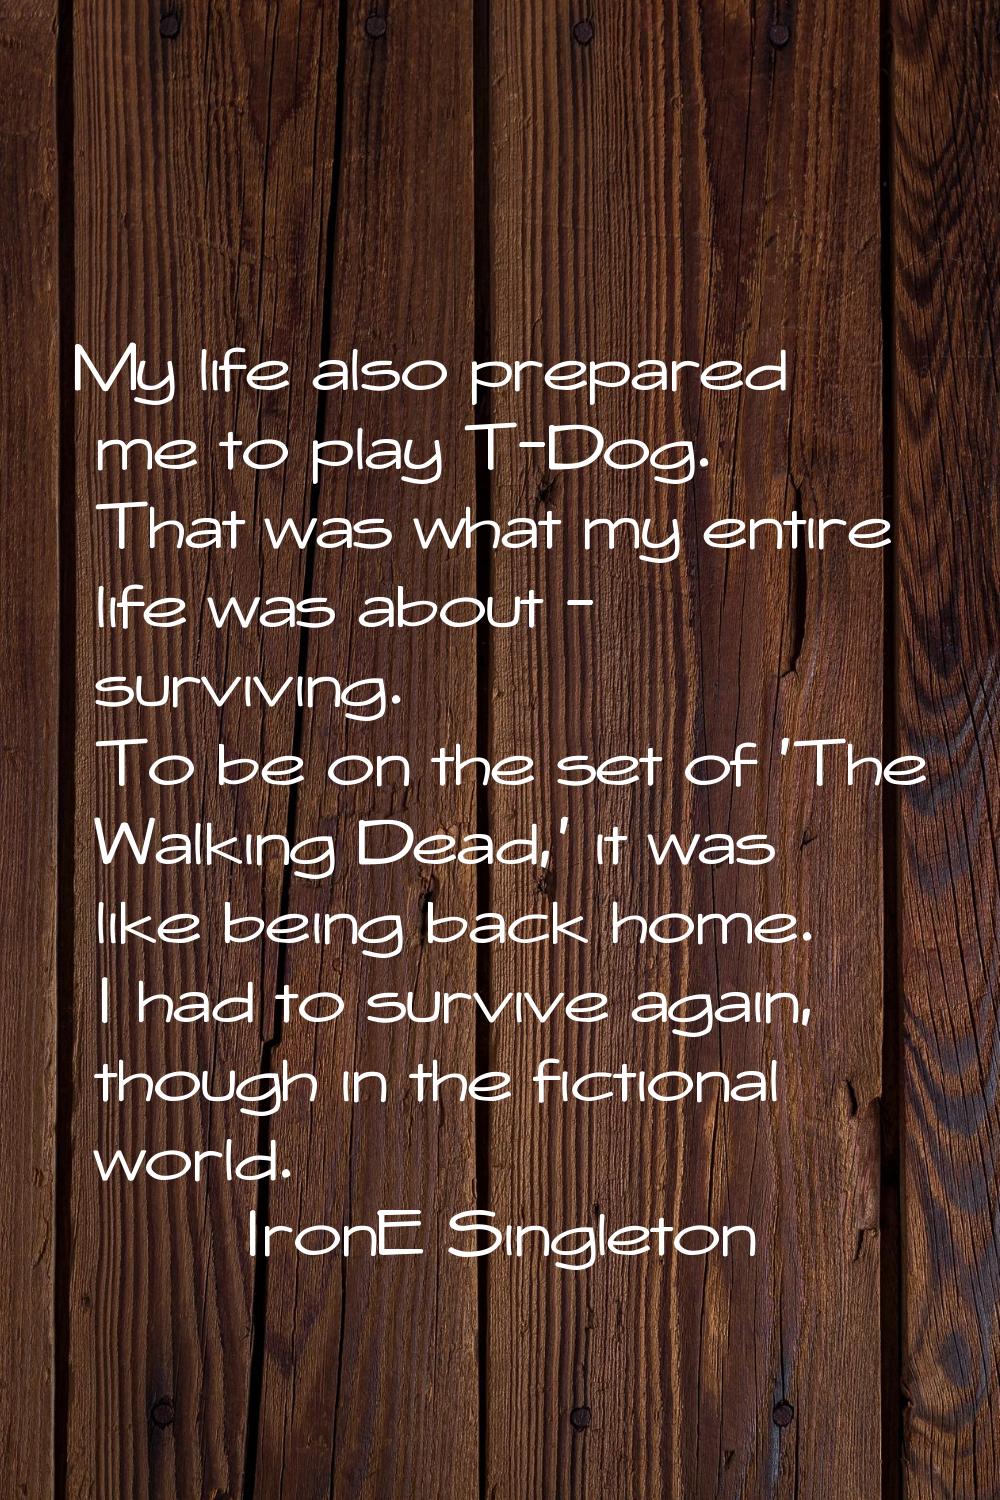 My life also prepared me to play T-Dog. That was what my entire life was about - surviving. To be o